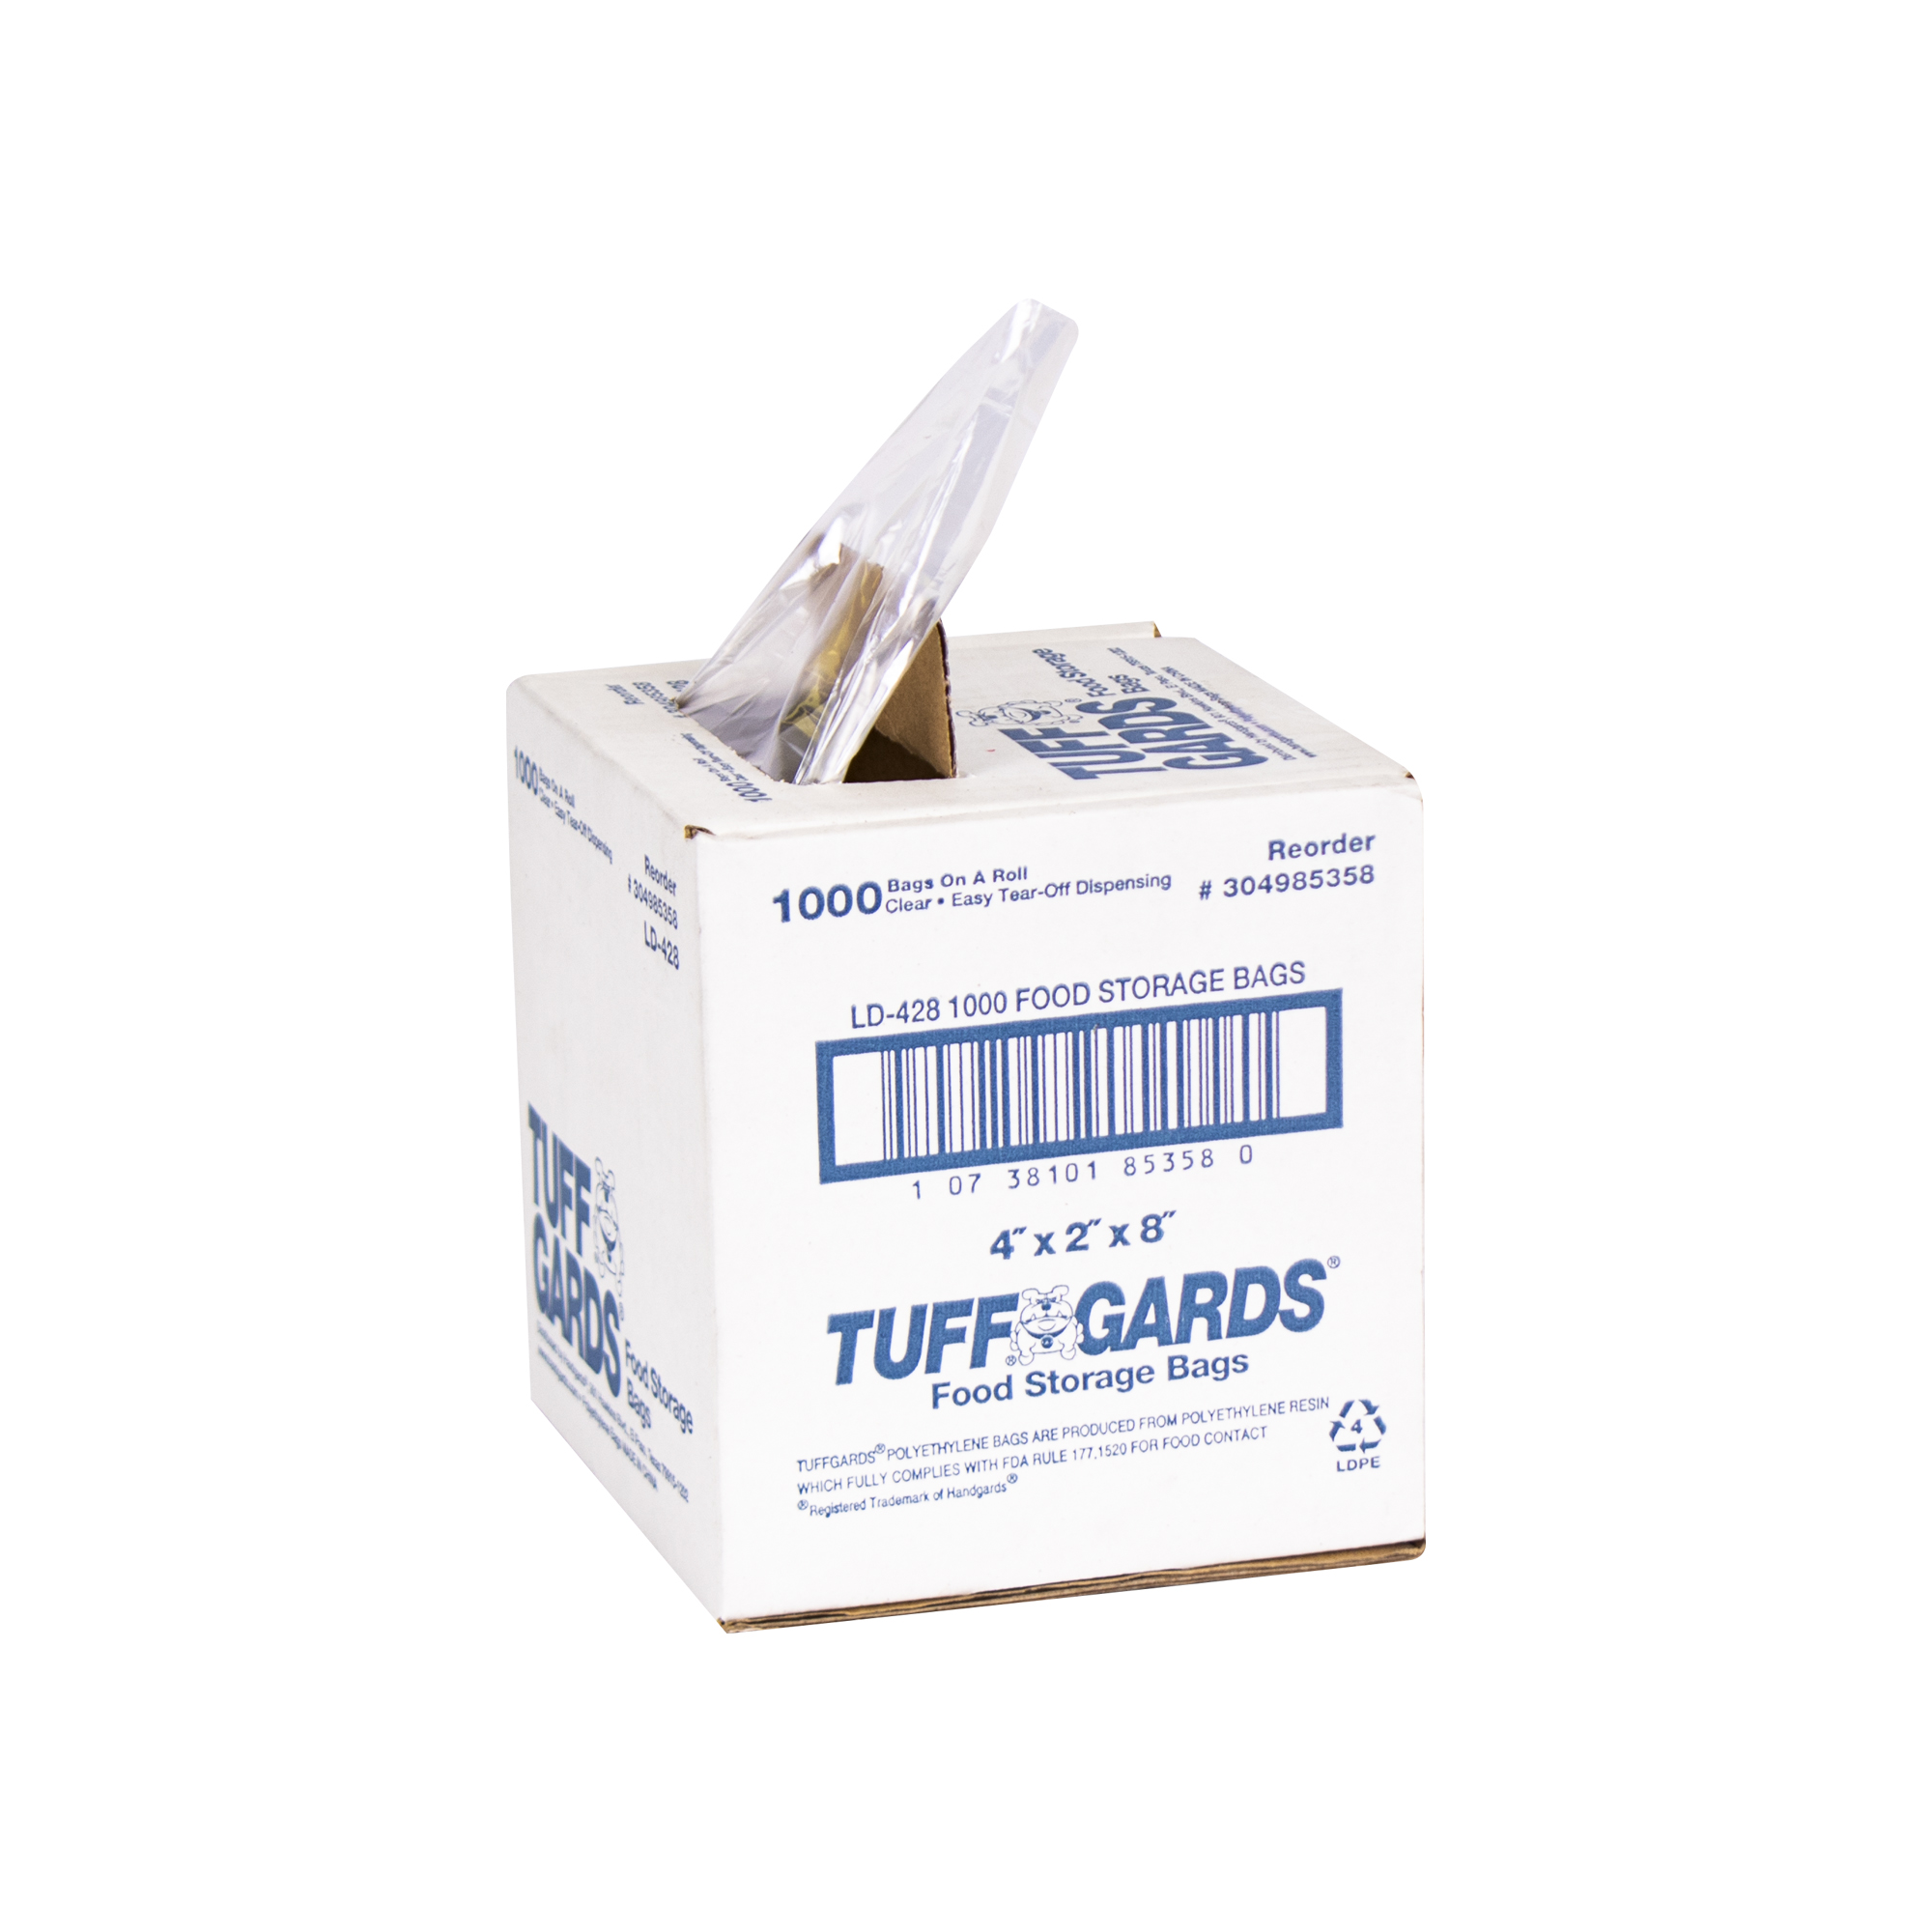 http://handgards.com/wp-content/uploads/2020/09/304985358-Tuffgards%C2%AE-Low-Density-Disposable-Food-Storage-Bags-%E2%80%93-LD428-%E2%80%93-4%E2%80%B3-x-2%E2%80%B3-x-8%E2%80%B3-Open-Case.jpg